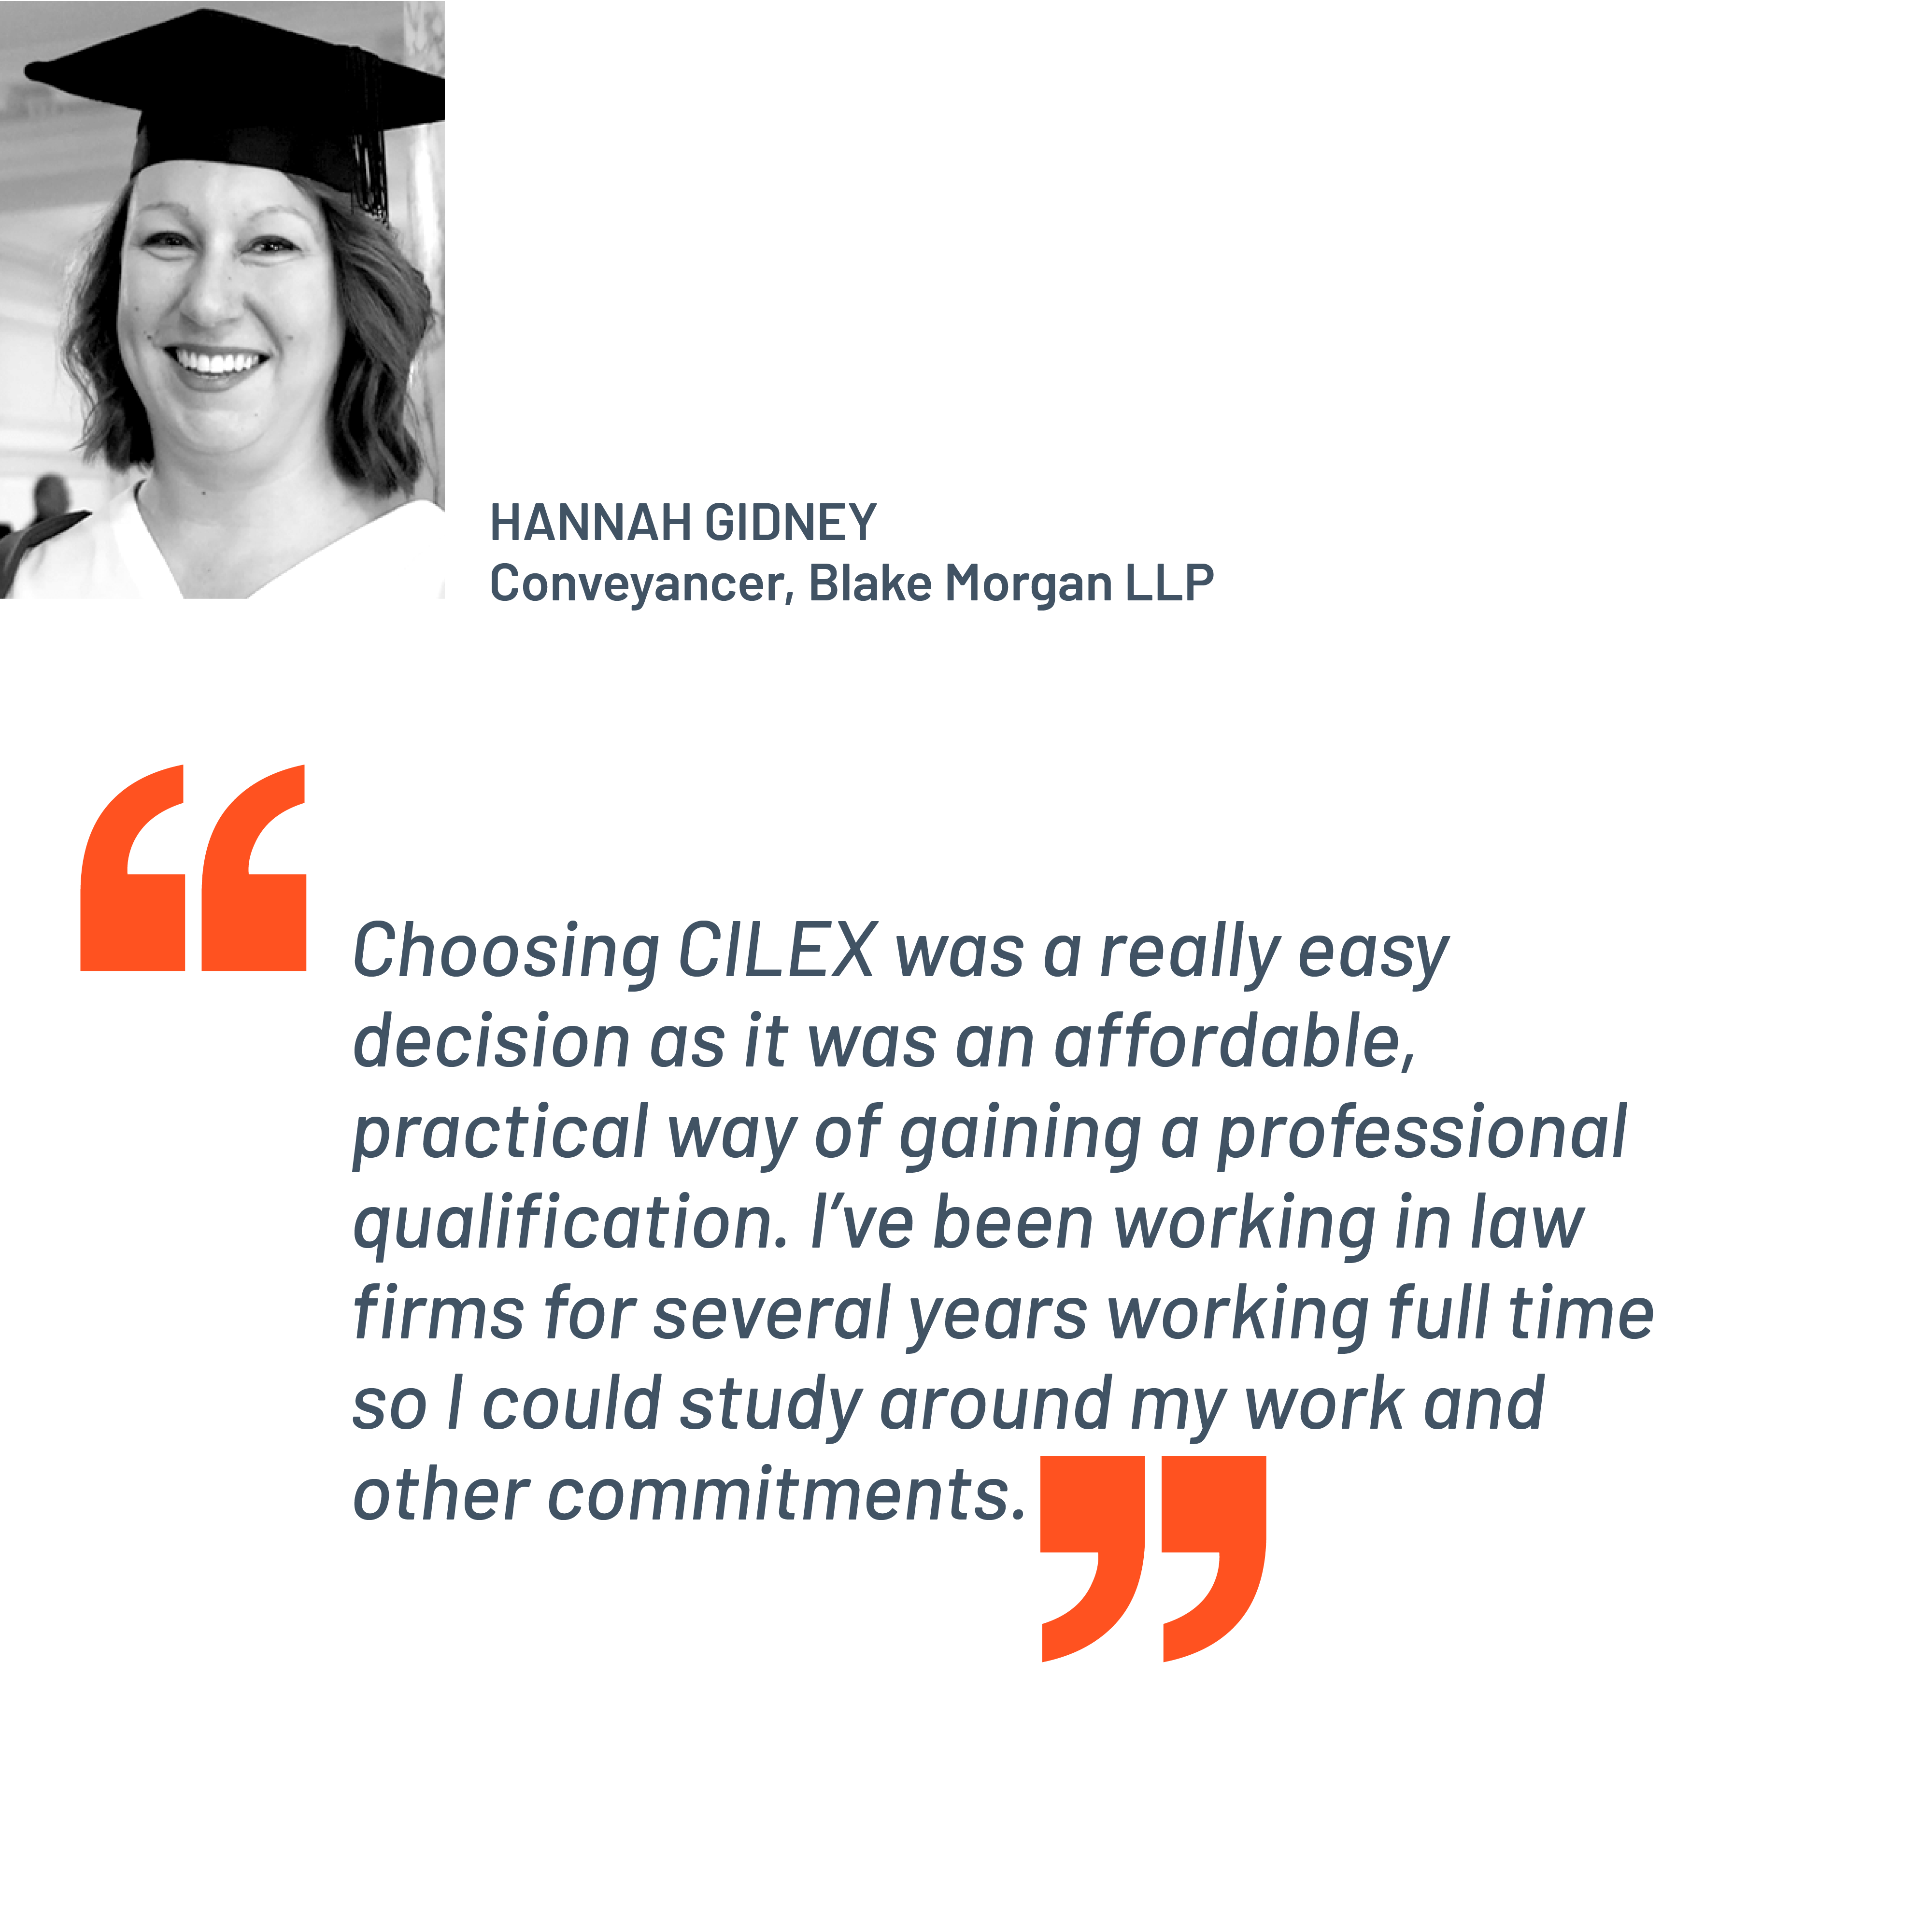 Quote from Hannah Gidney, Conveyancer, Blake Morgan LLP. "Choosing CILEX was a really easy decision as it was an affordable, practical way of gaining a professional qualification. I’ve been working in law firms for several years working full time so I could study around my work and other commitments."